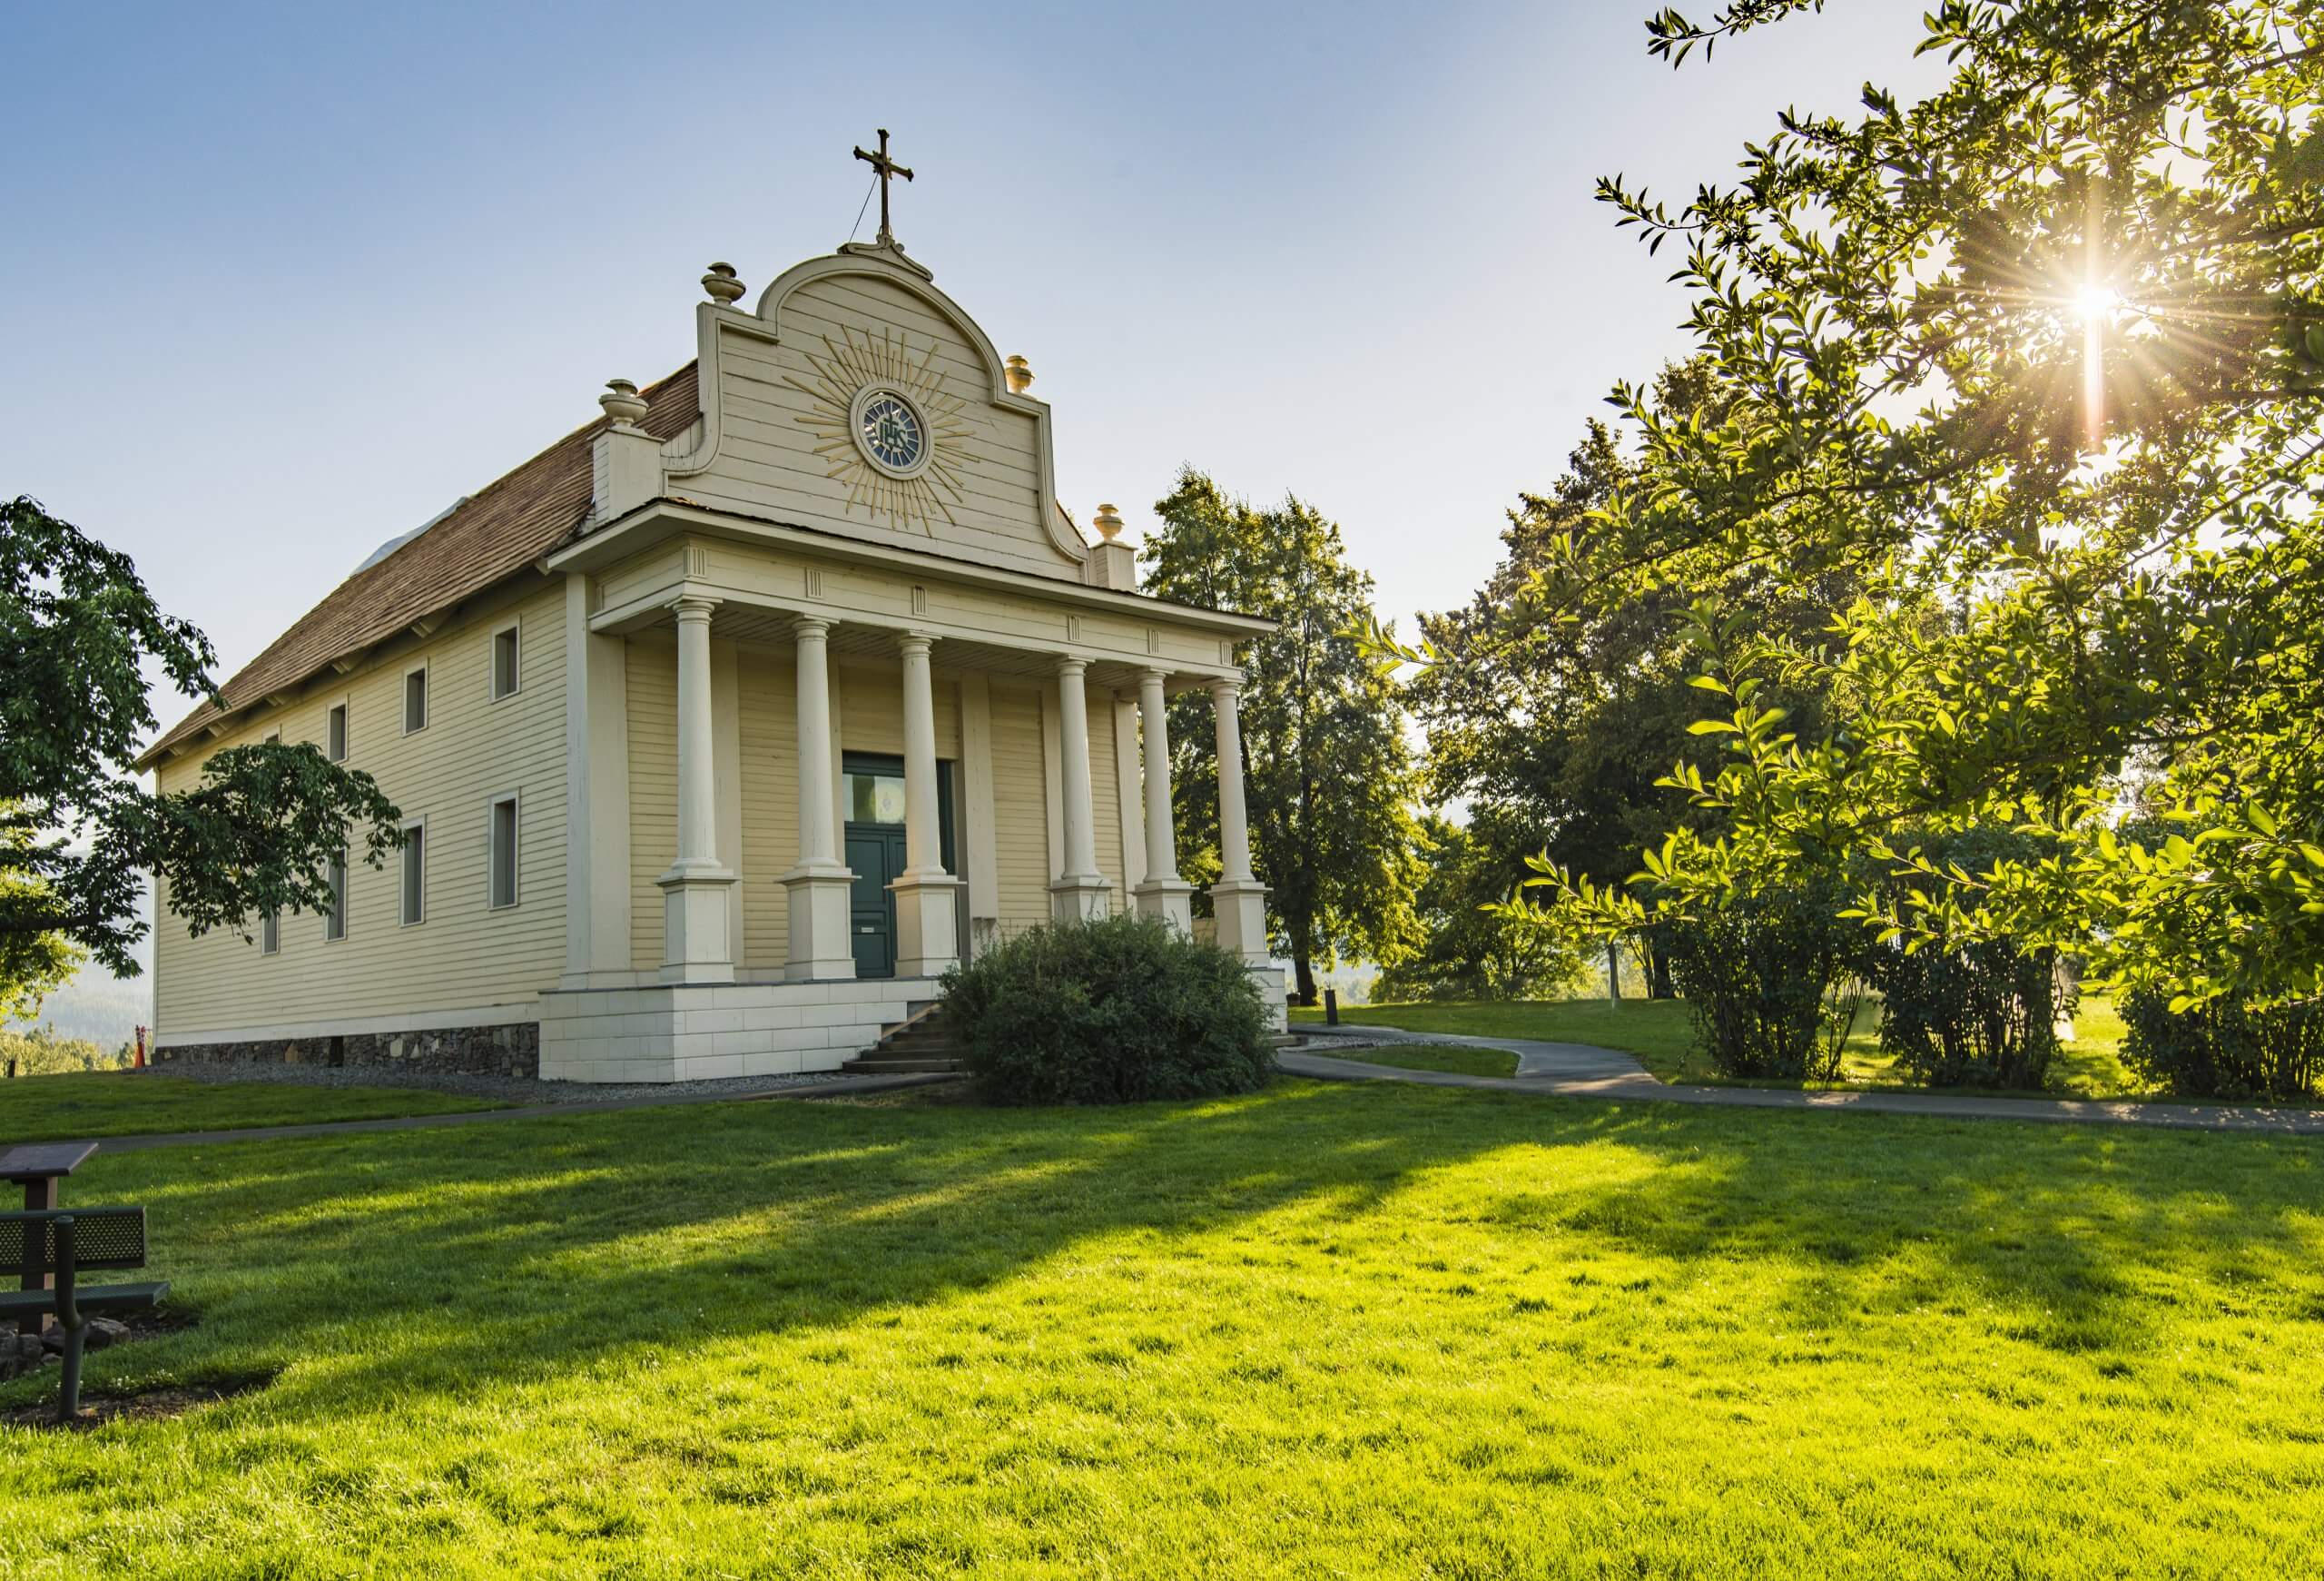 cataldo mission at golden hour, surrounded by grass and trees